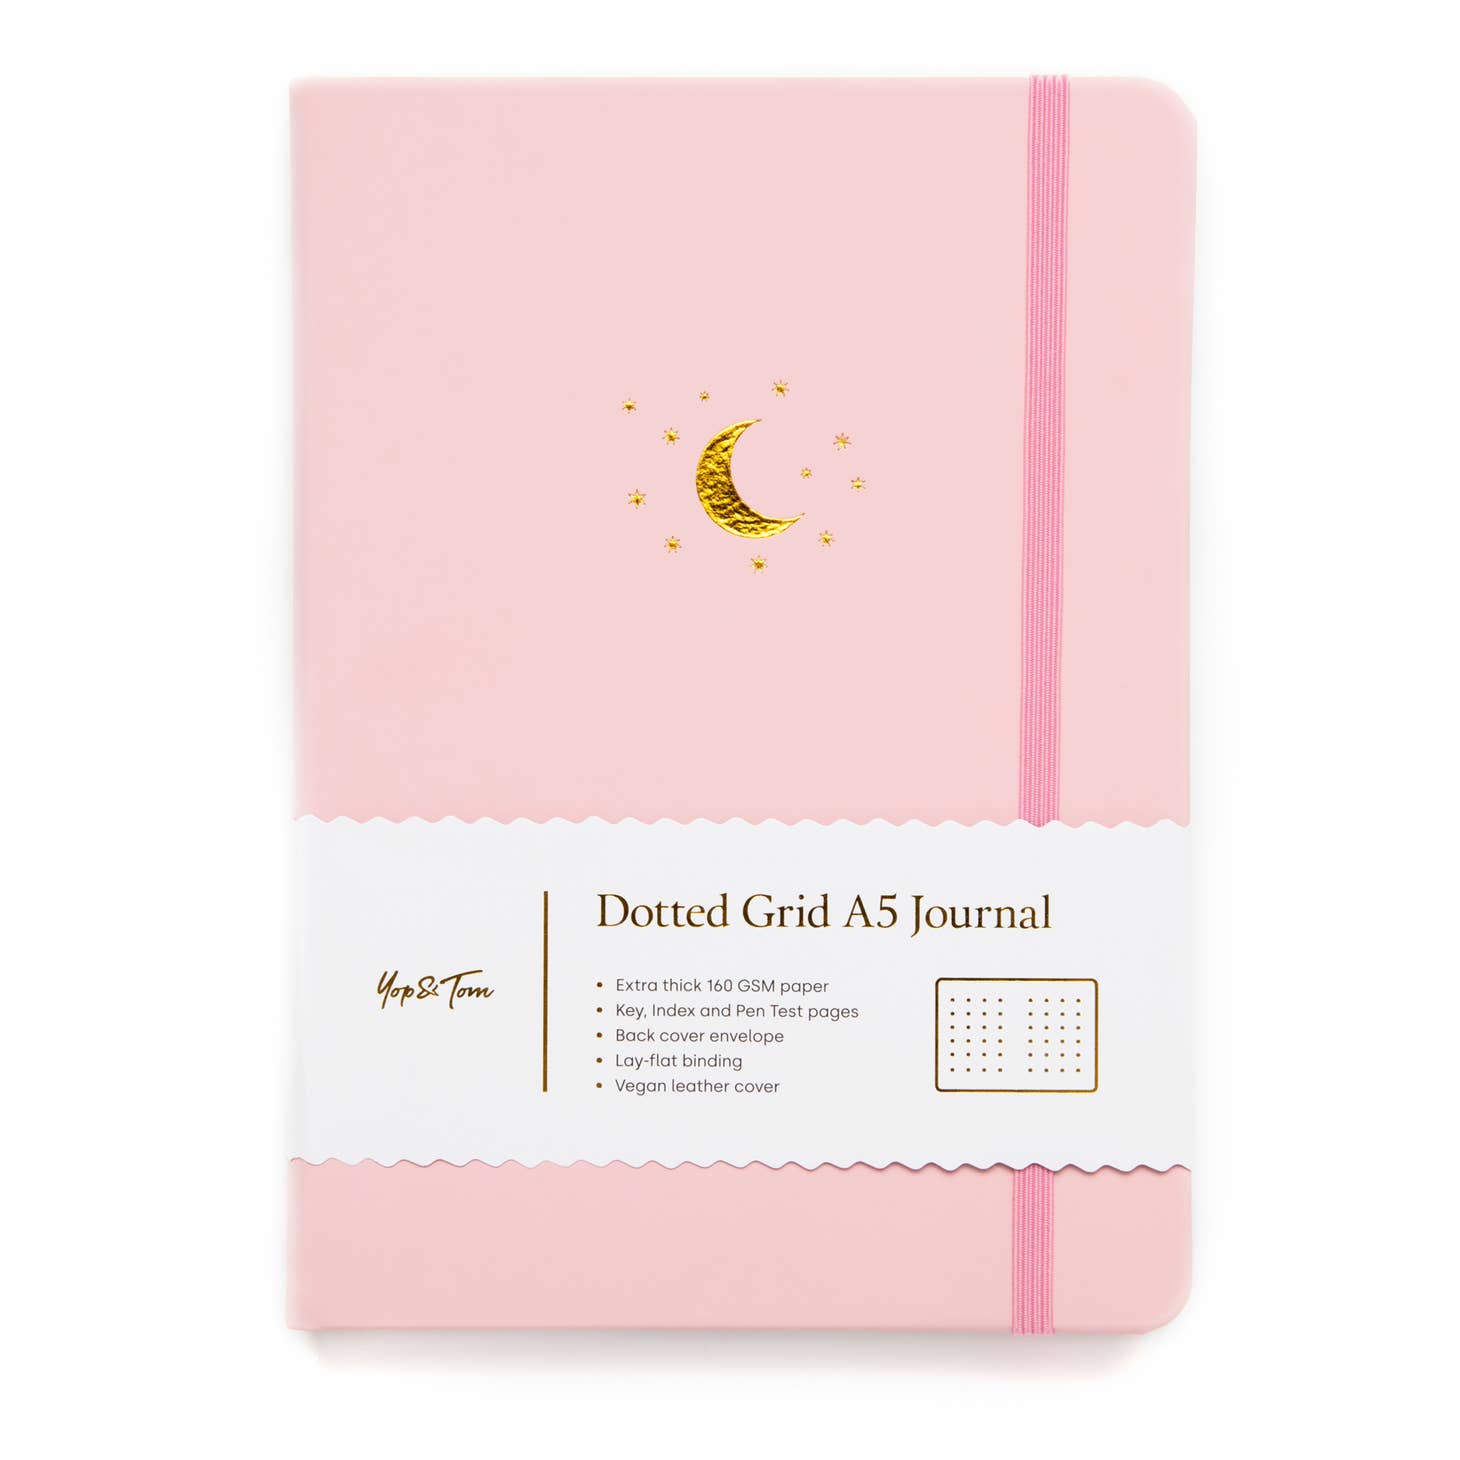 Yop & Tom Pink Moon Journal, Dotted